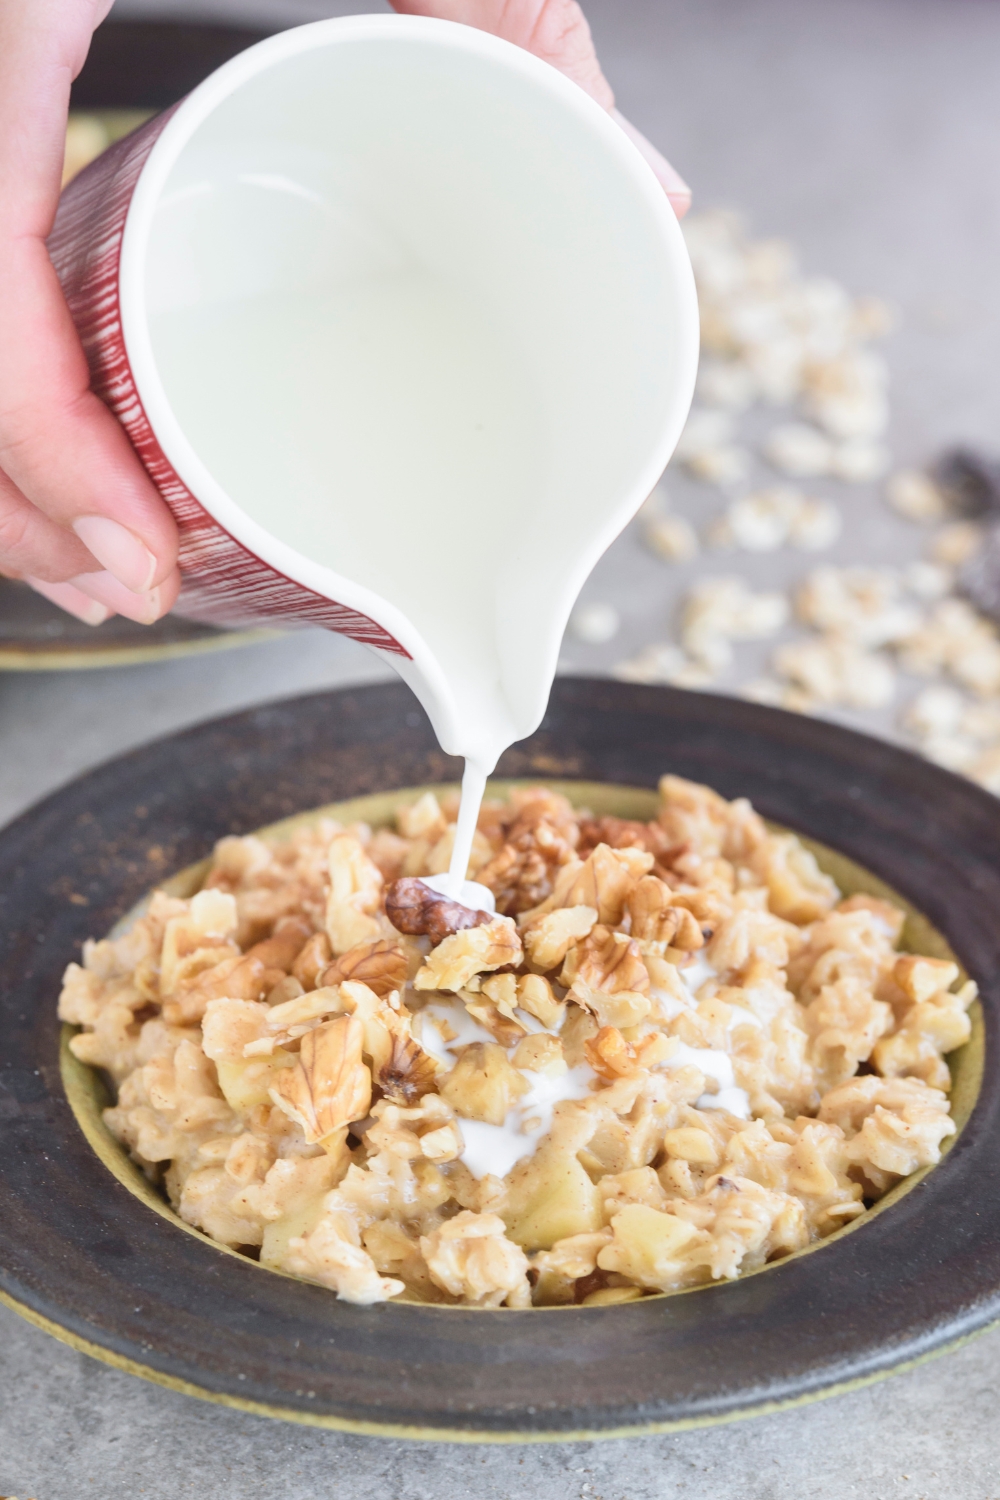 A pitcher of milk being poured over a bowl of oatmeal that's topped with apples and chopped nuts.